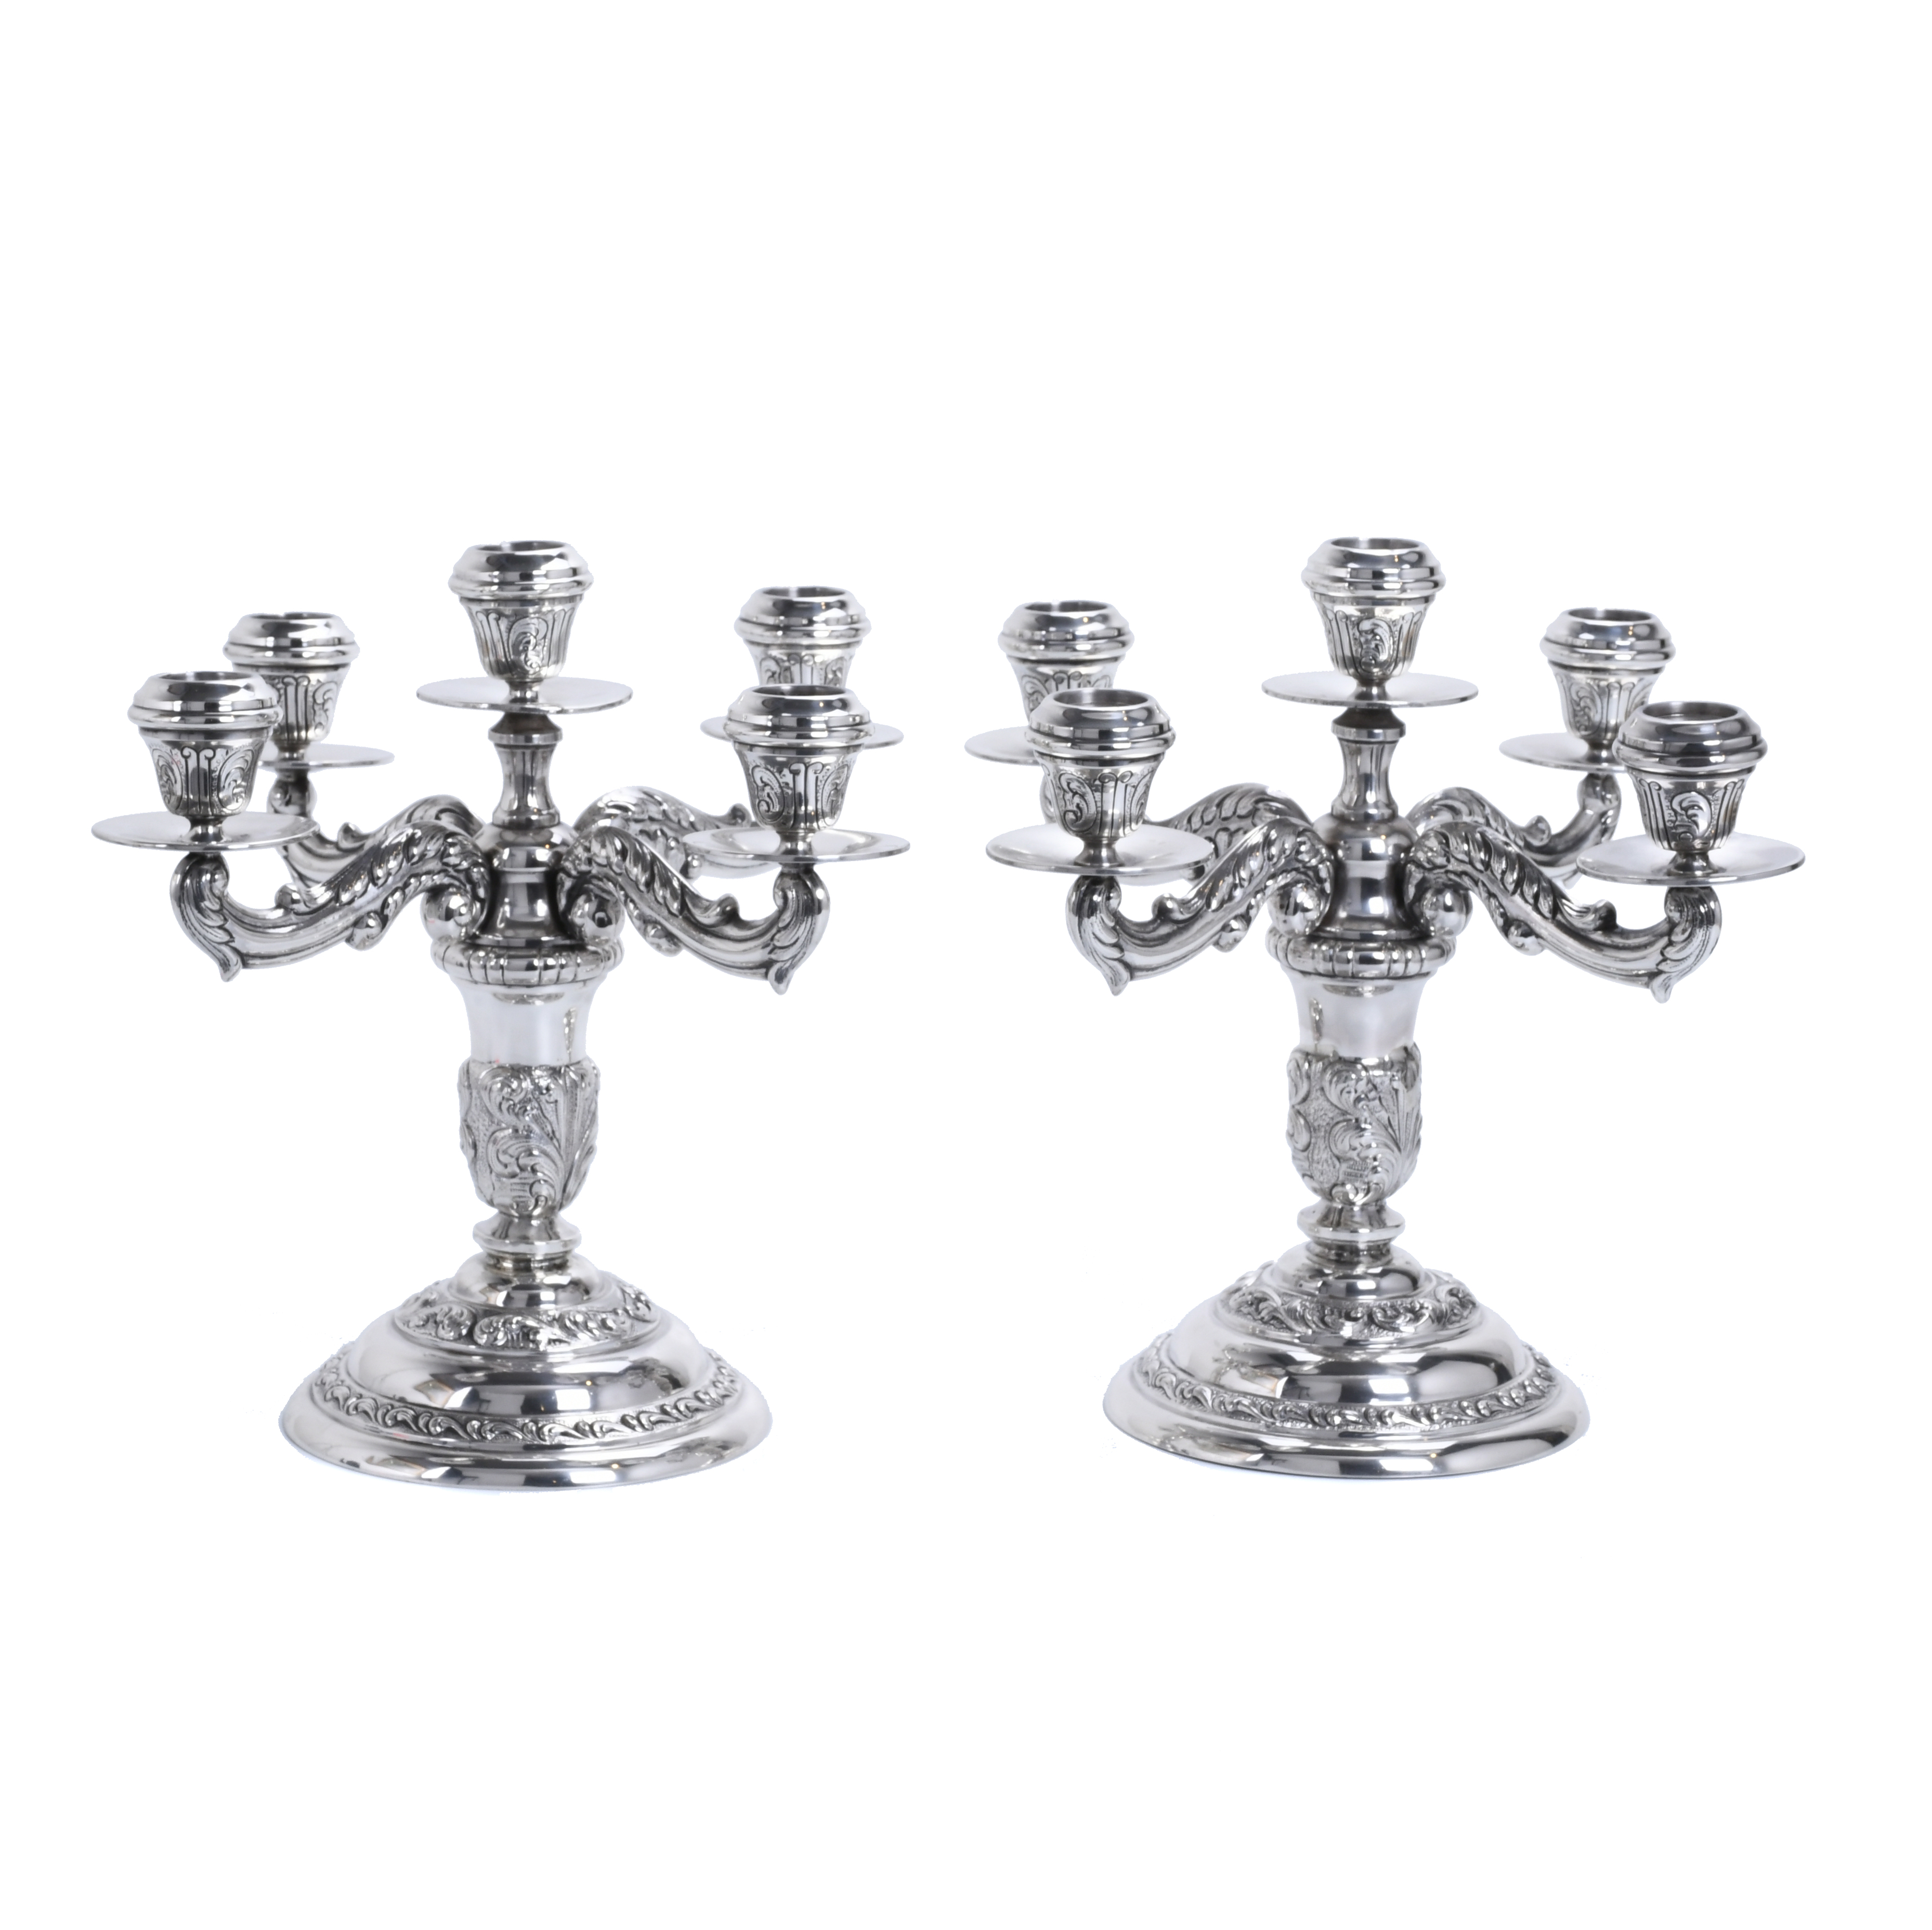 PAIR OF SPANISH CANDELABRA IN SILVER, MID 20TH CENTURY.